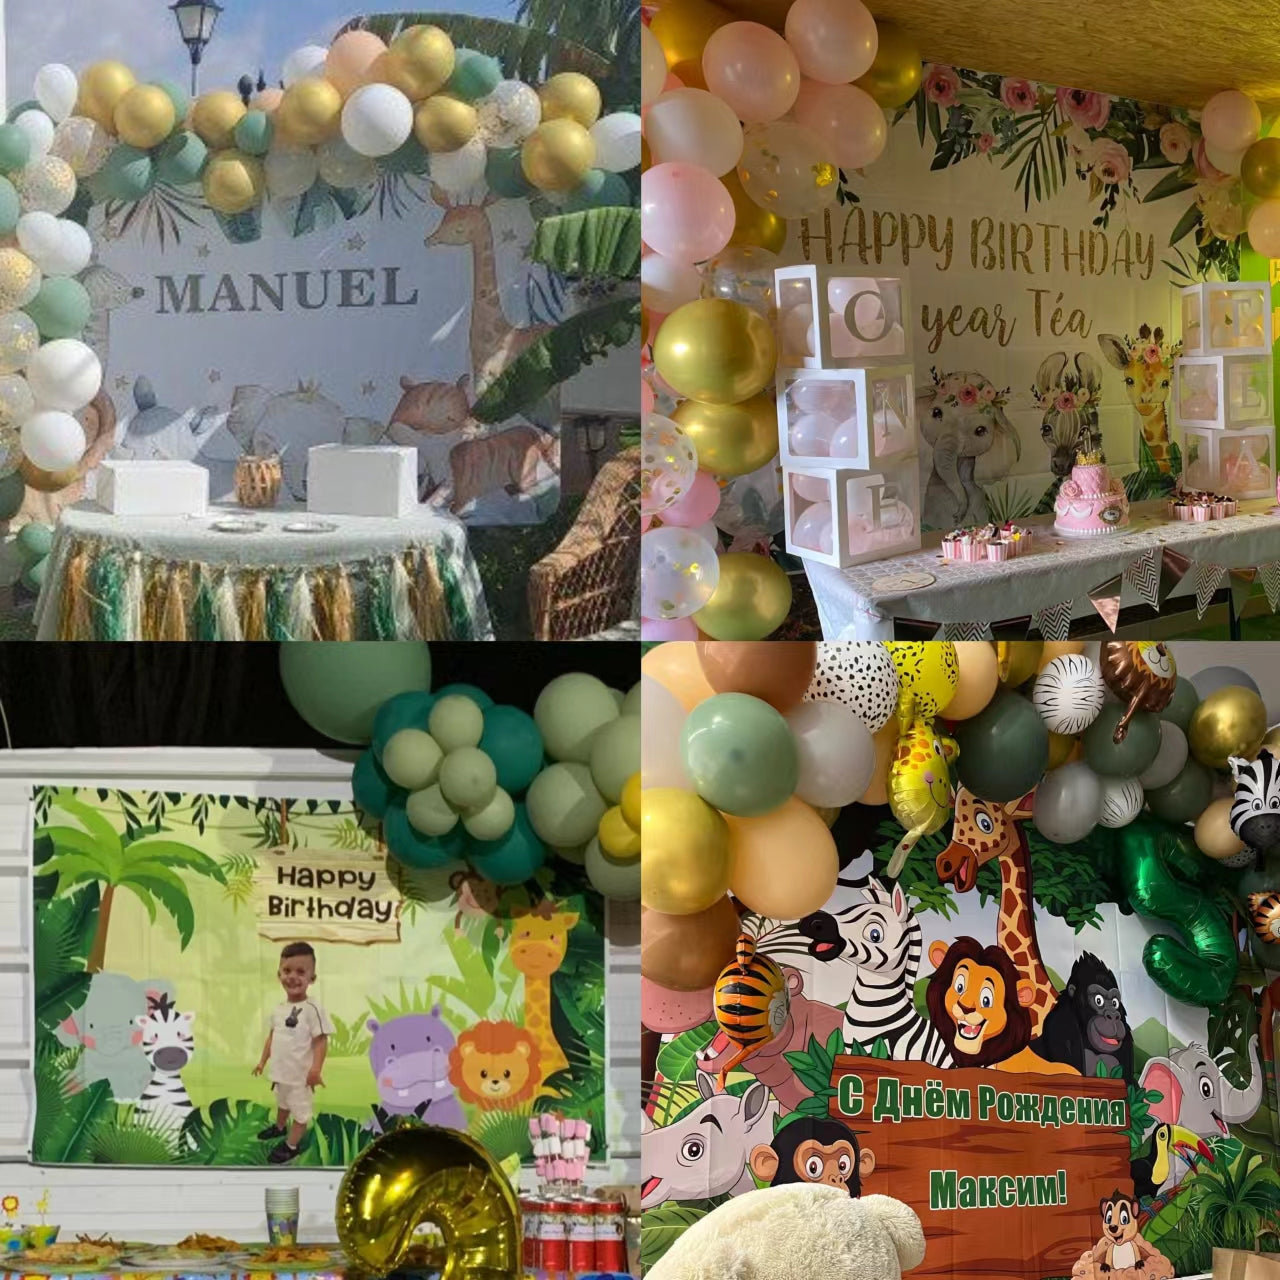 Animal Forest Baby Shower Party Decoration Backdrop Banner